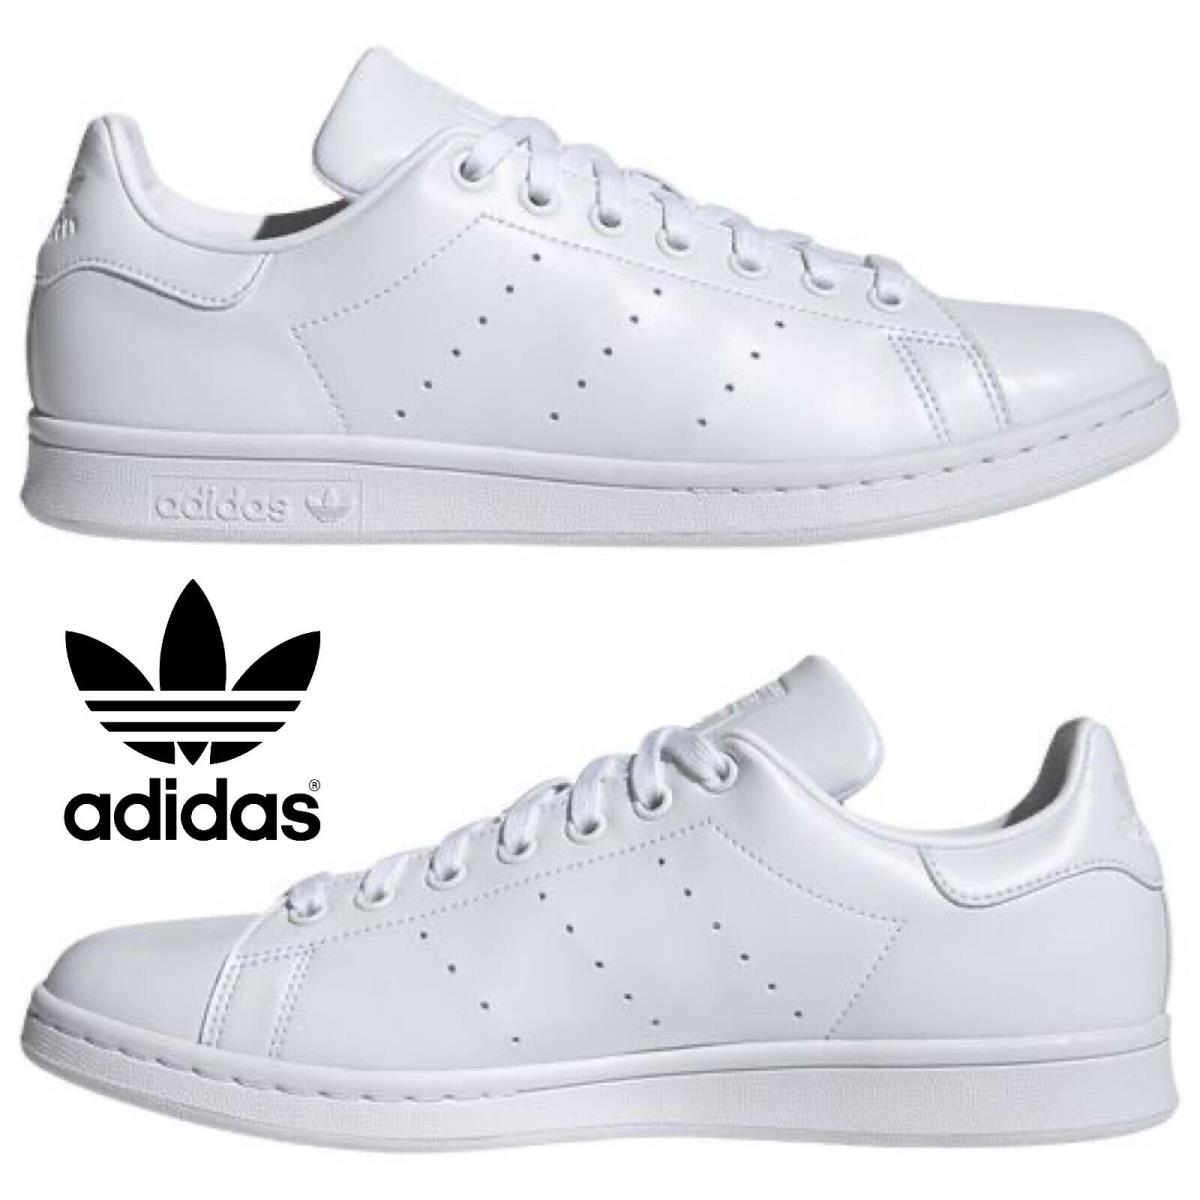 Adidas Originals Stan Smith Men`s Sneakers Comfort Sport Casual Shoes White